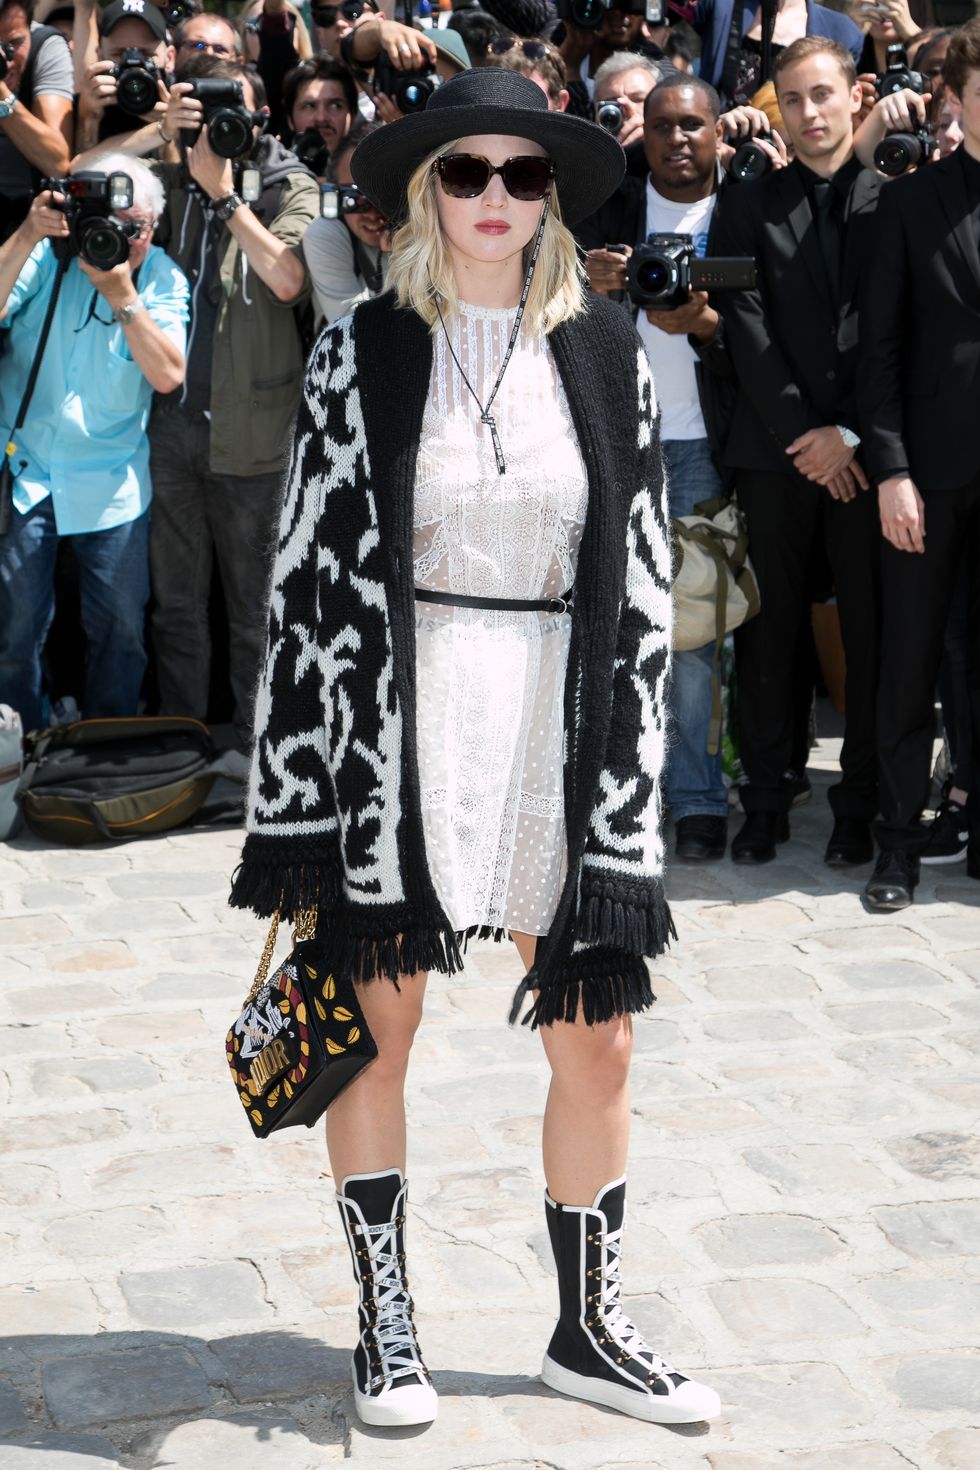 Jennifer Lawrence attends the Dior Couture show at Paris Fashion Week